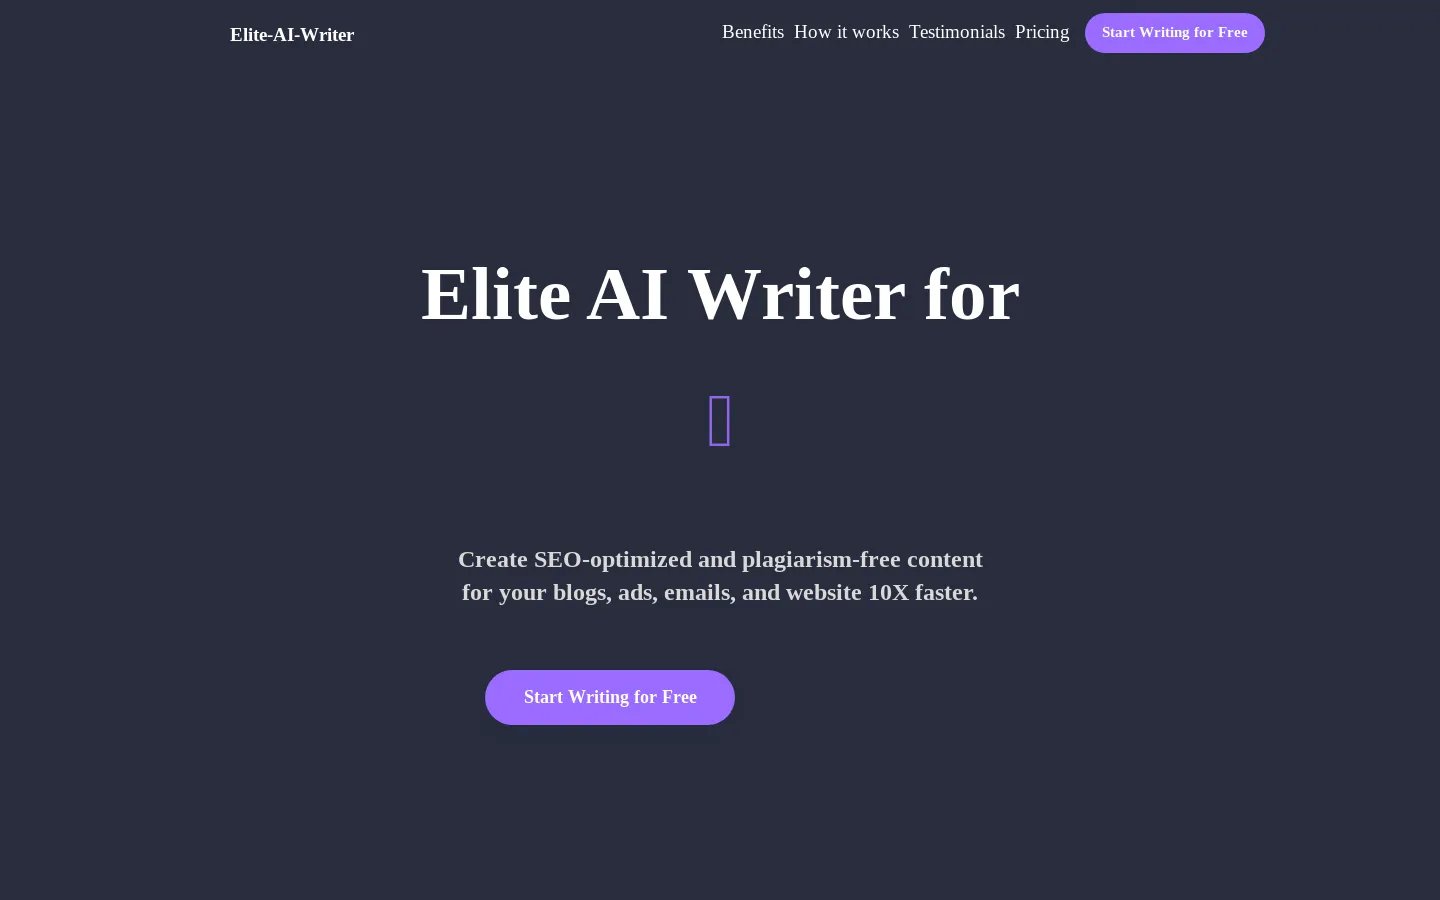 Elite-AI-Writer - AI-Powered Content Creation for Blogs, Ads, Emails, and Websites